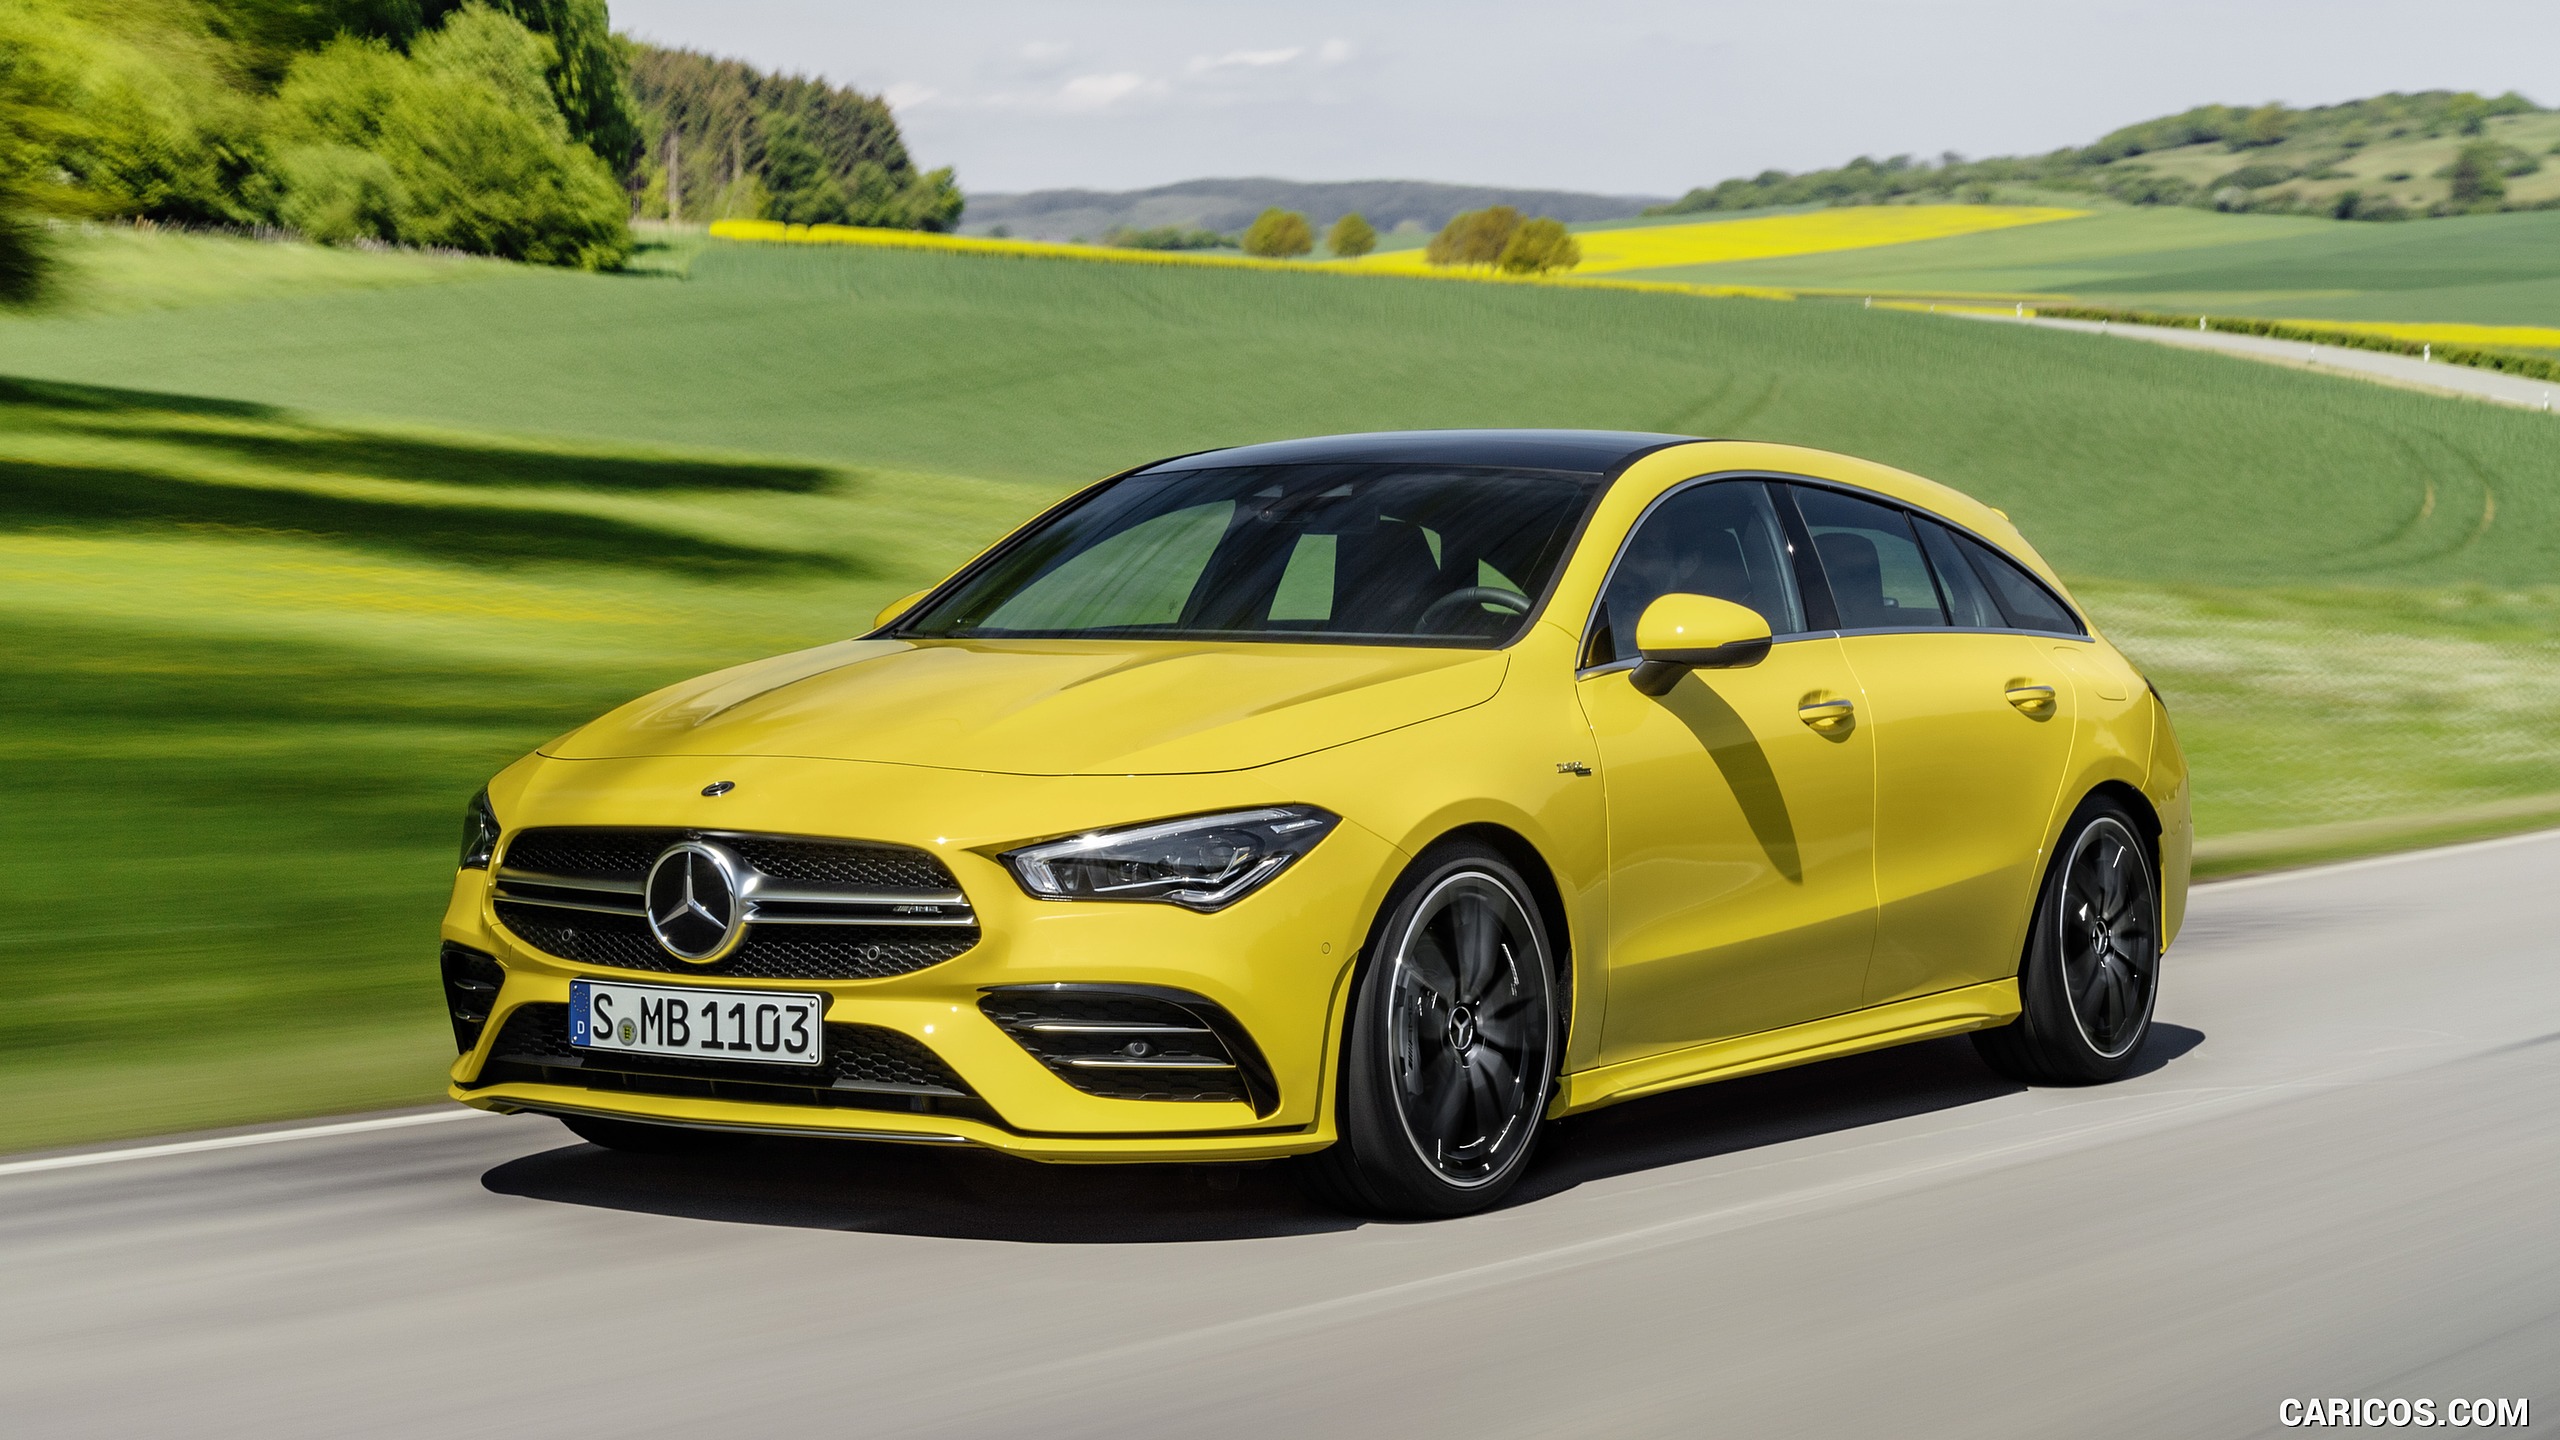 2020 Mercedes-AMG CLA 35 4MATIC Shooting Brake - Front Three-Quarter, #1 of 21